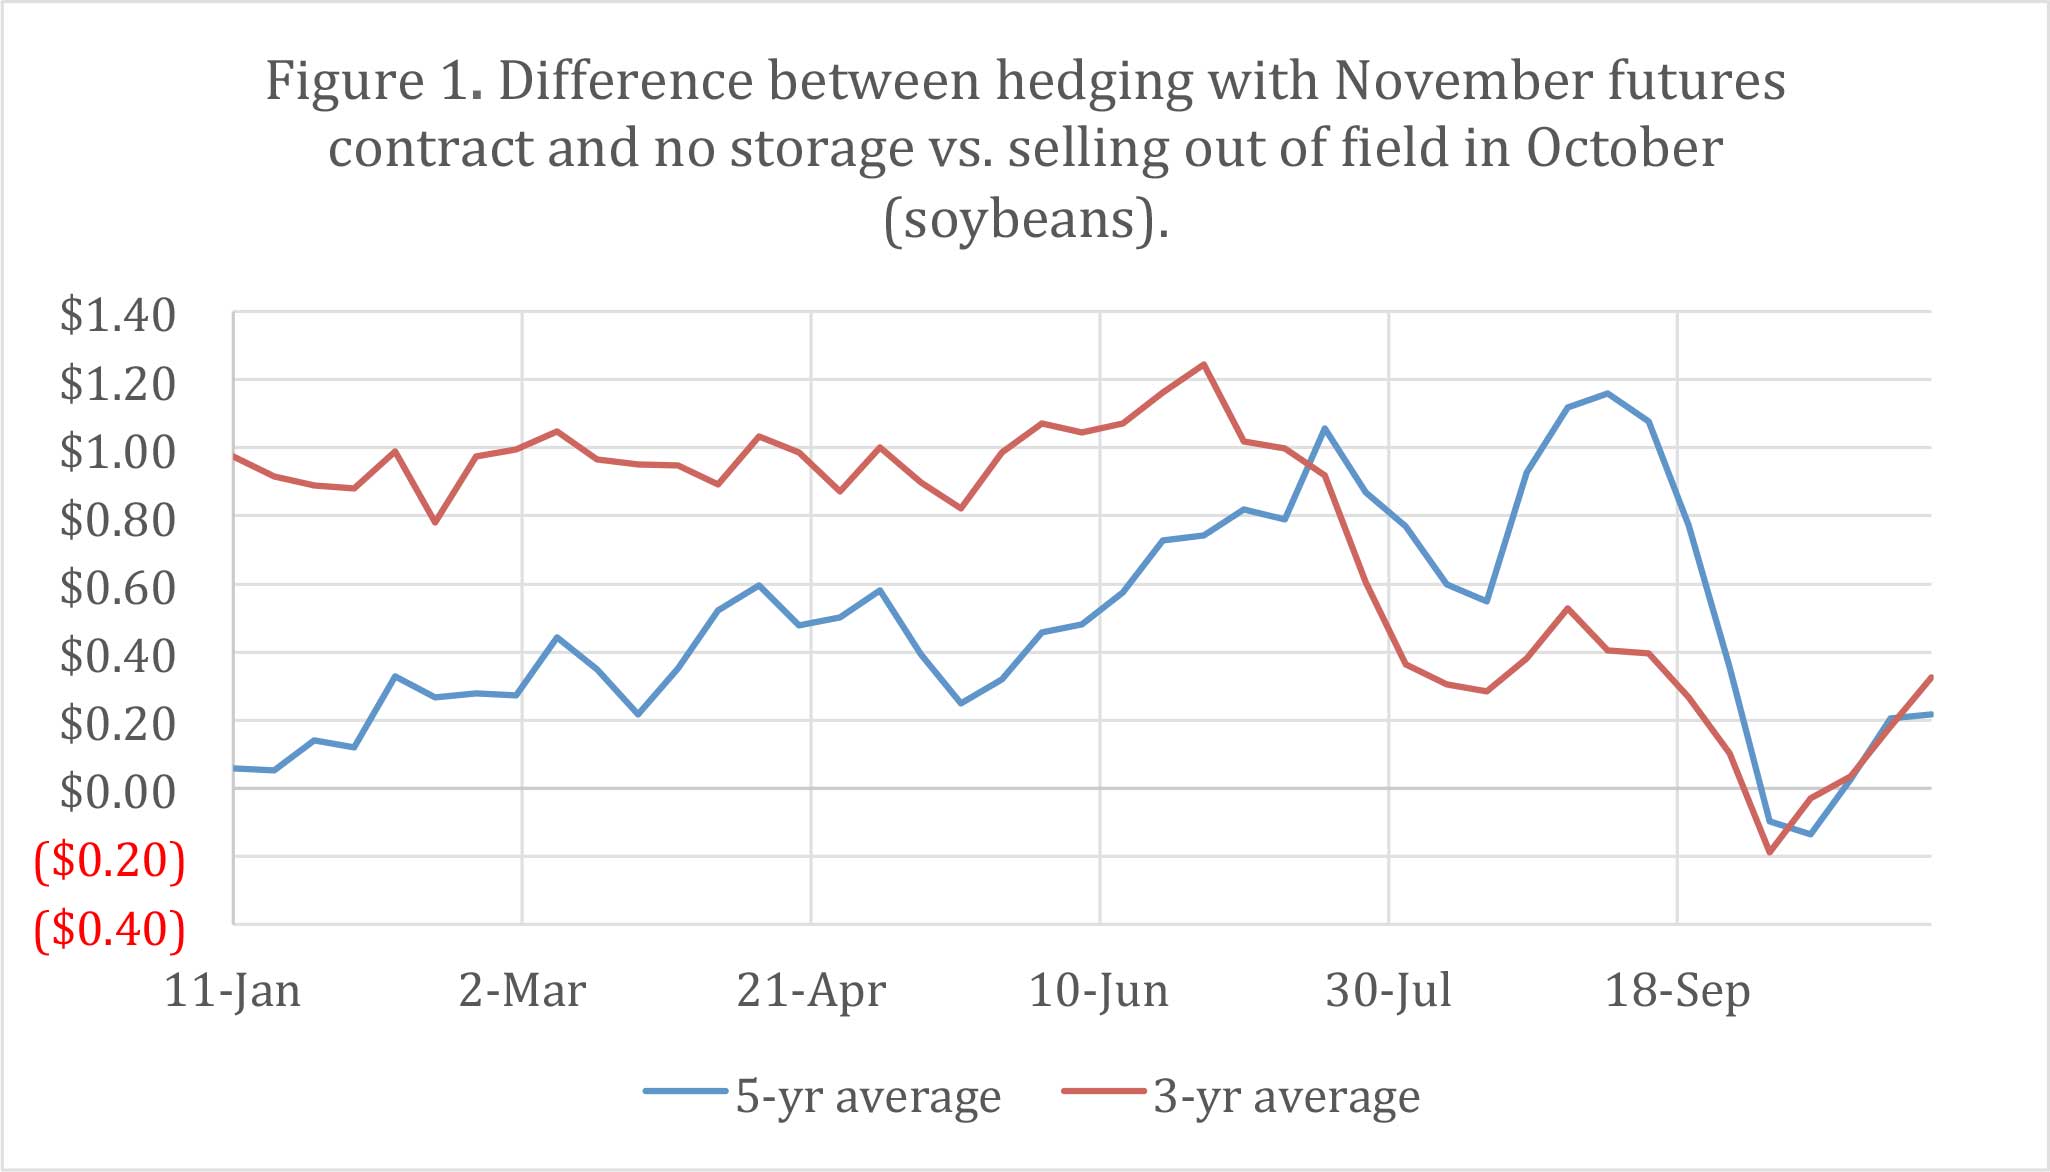 A chart showing the difference between hedging with November futures contract and no storage vs. selling out of Iield in October (soybeans).